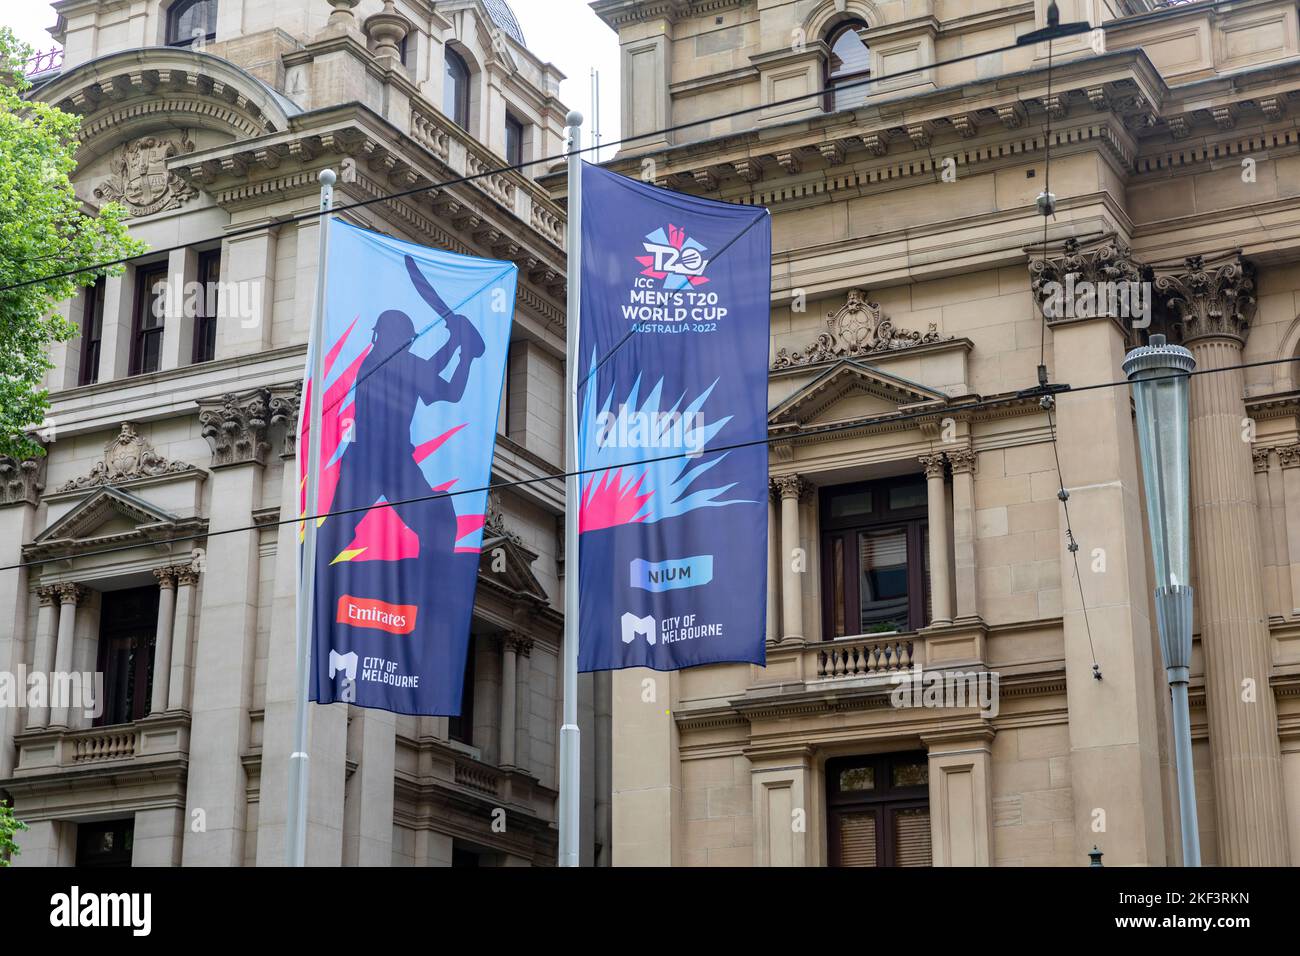 Melbourne 2022 hosts the T20 mens cricket World Cup final at the MCG, banners promote the event outside melbourne town hall,Victoria,Australia Stock Photo